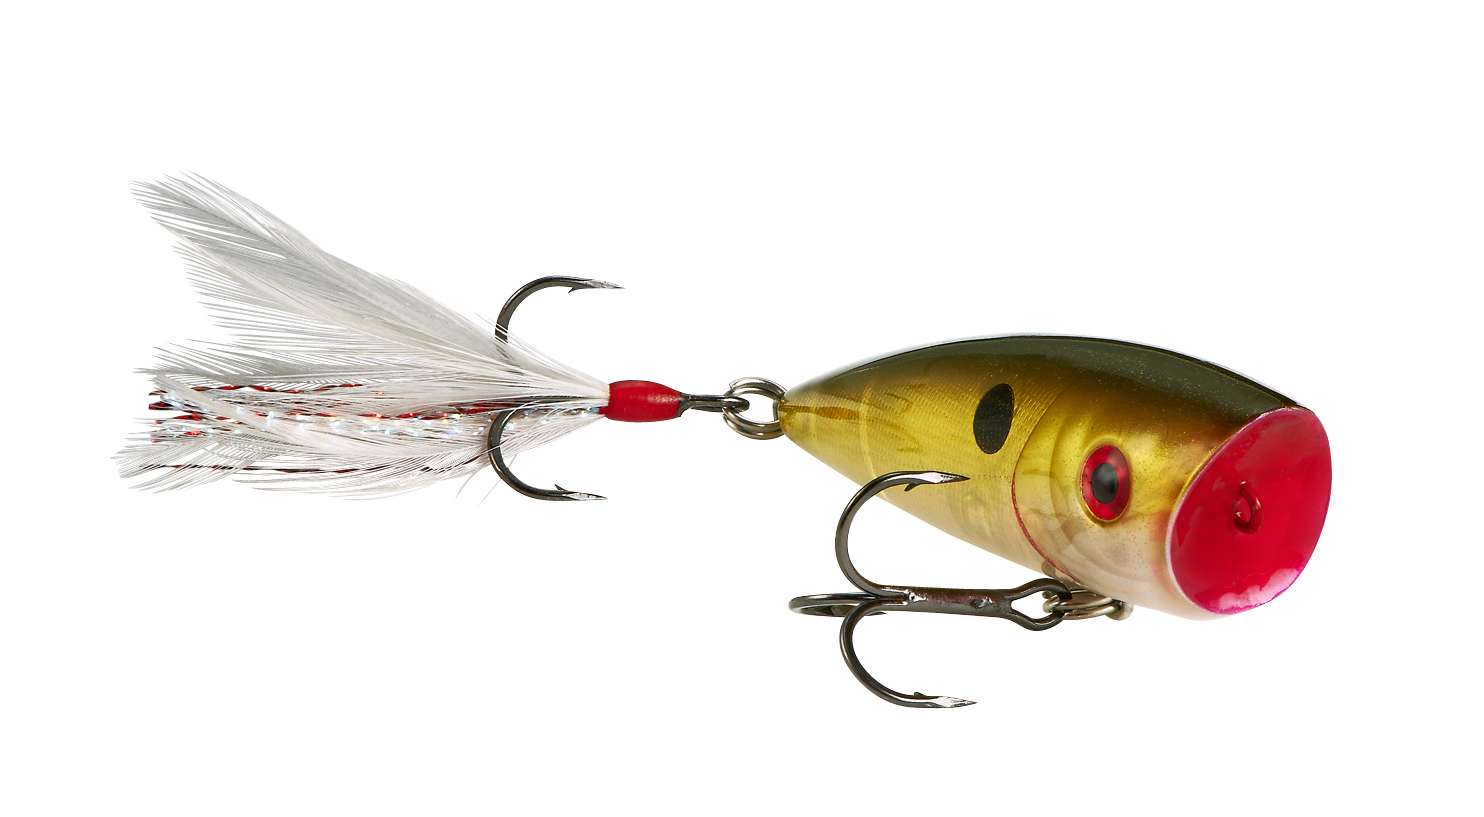 <b>BOOYAH</b><br>	Boss Pop<br>	This new topwater bait from BOOYAH features an Easter egg-shaped face that's less deep than other chuggers to allow it to skitter across the surface like a panicked baitfish but still chug and spit like the rest. The Boss Pop is available in two sizes, 2-5/16 inches (1/4 ounce) and 2-3/4 inches (3/8 ounce) and eight color patterns. 